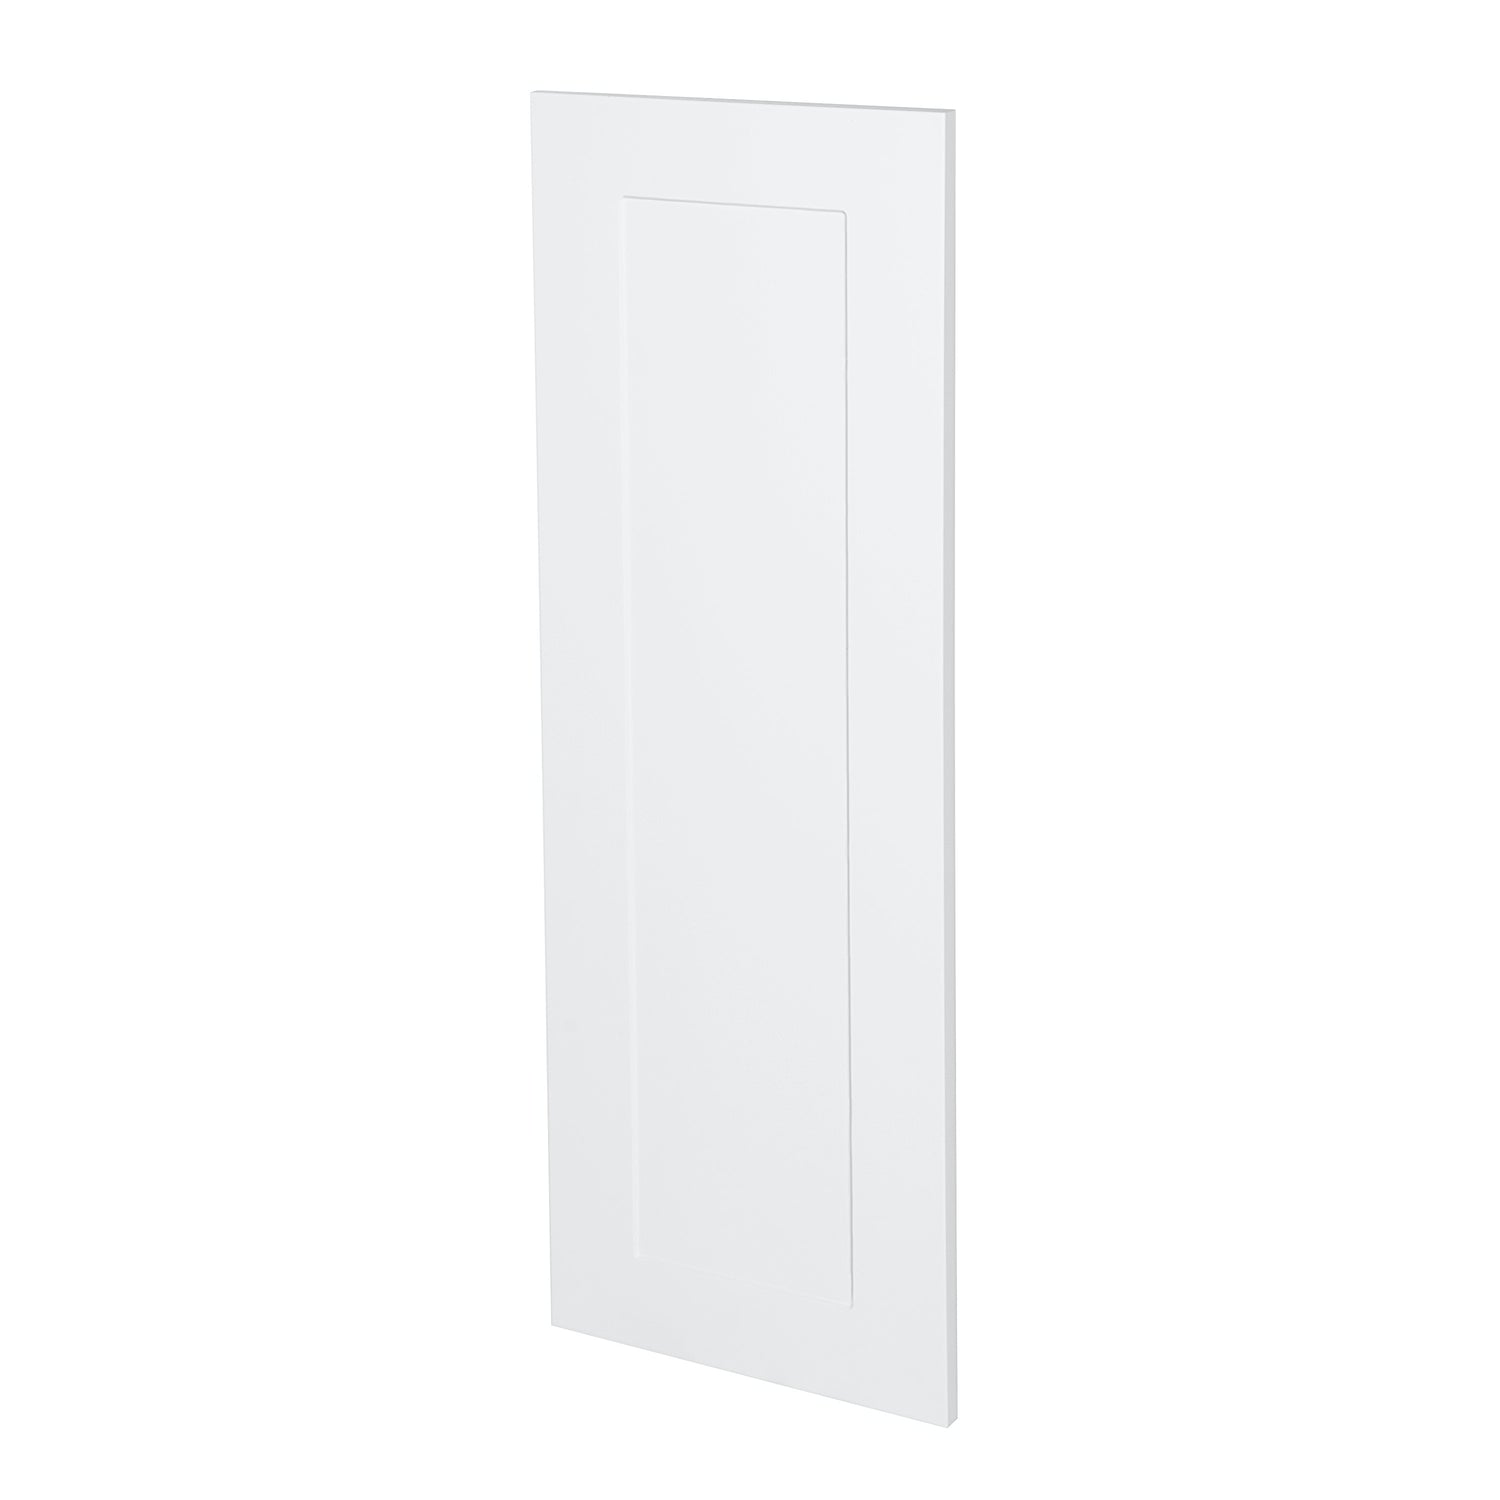 White Shaker Style Kitchen Cabinet End Panel (12 in W x 0.75 in D x 30 in H) -  Pro-Edge HD